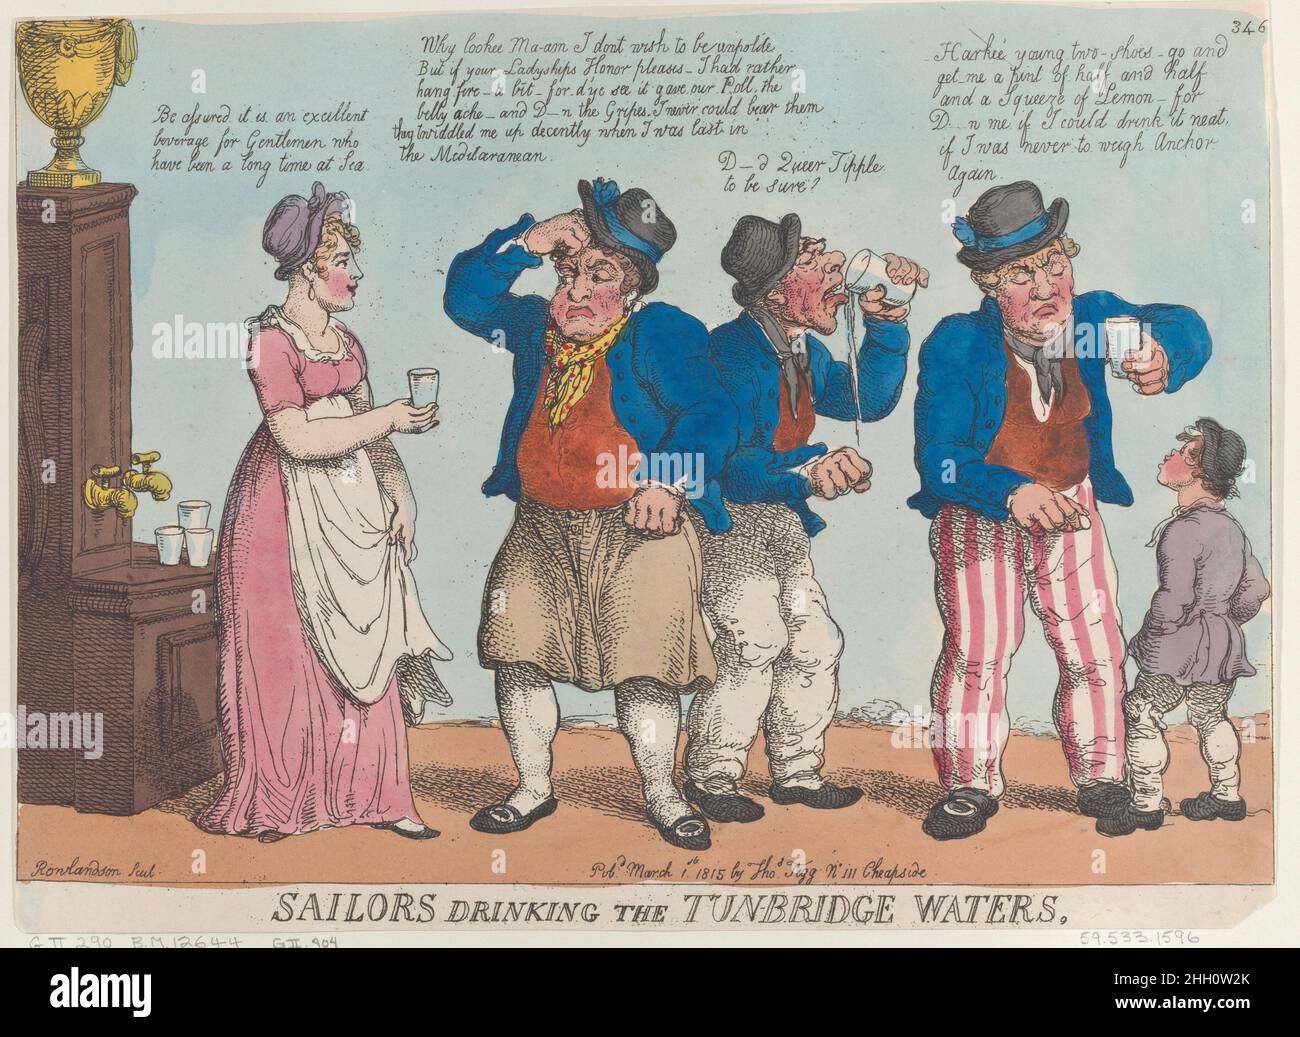 Sailors Drinking the Tunbridge Waters March 1, 1815 Thomas Rowlandson A young woman stands by the pump and offers a drink to a sailor who scratches his head. She says: 'Be assured it is an excellent beverage for Gentlemen who have been a long time at sea.' He answers: 'Why lookee Ma-am I dont wish to be unpolite But if your Ladyships Honor pleases—I had rather hang fire—a bit—for d'ye see it gave our Poll, the belly ache—and D—n the Gripes, I never could bear them they twiddled me up decently when I was last in the Meditaranean.' An elderly sailor at right tries to drink water and says: 'D—d Q Stock Photo